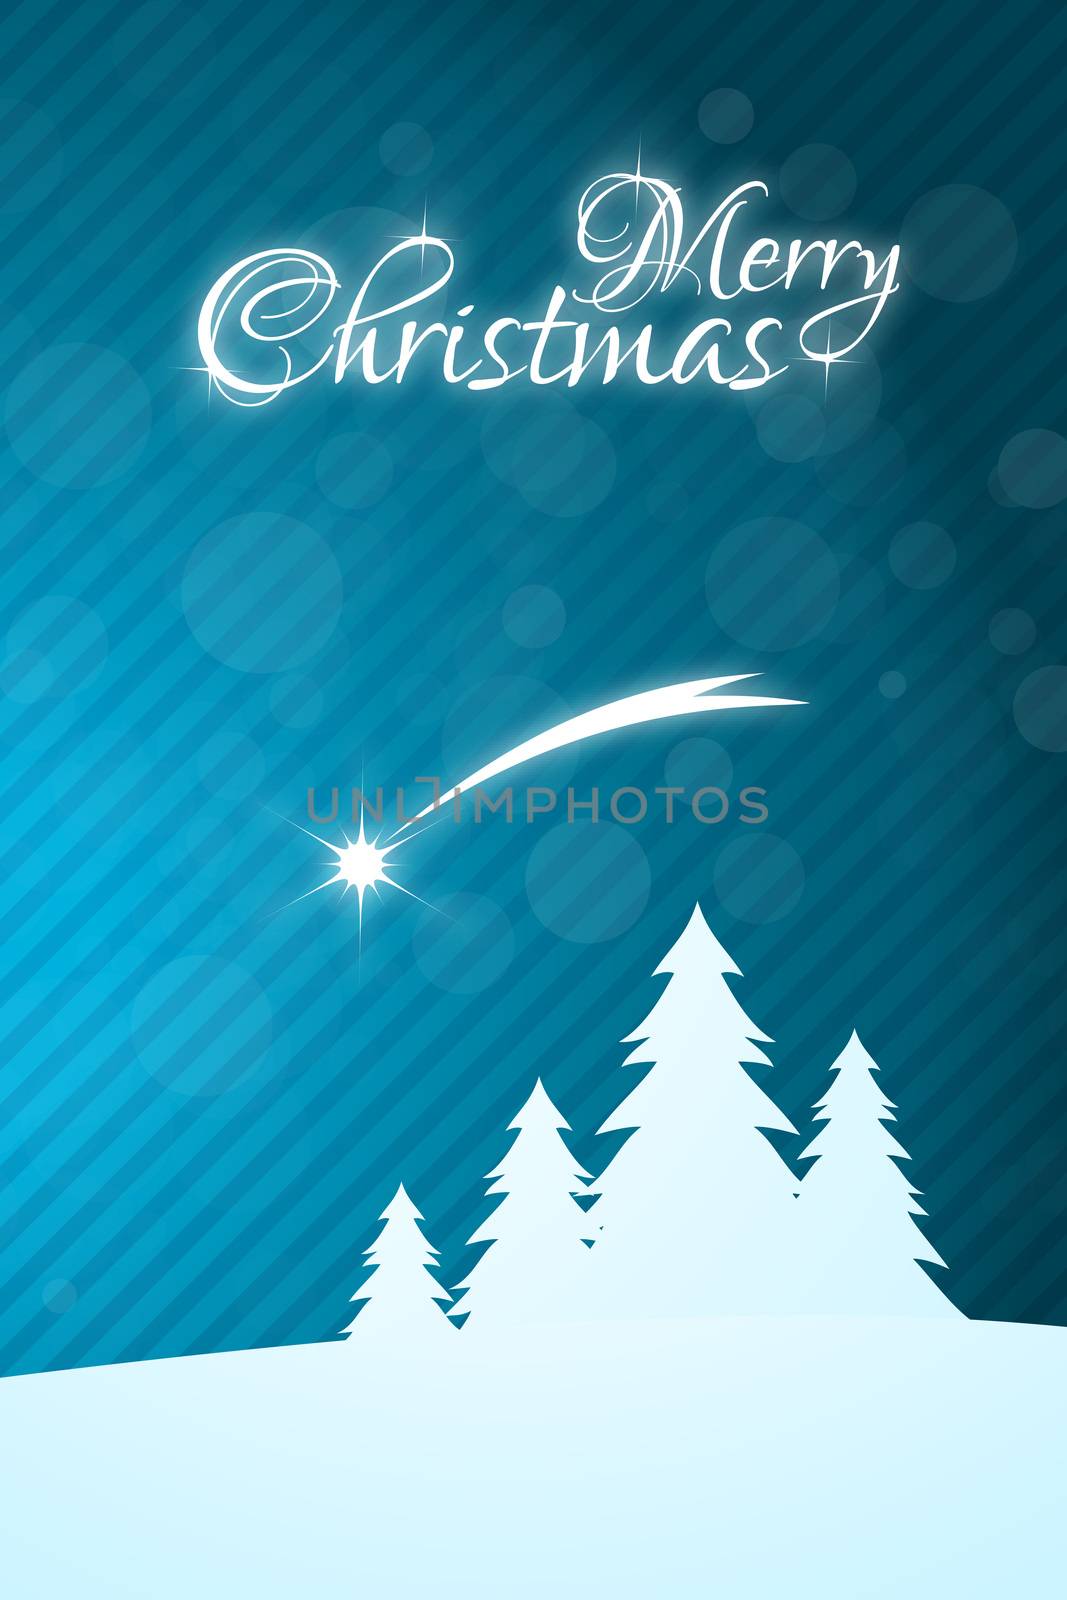 Merry Christmas Greeting Card with Christmas Trees and falling Star